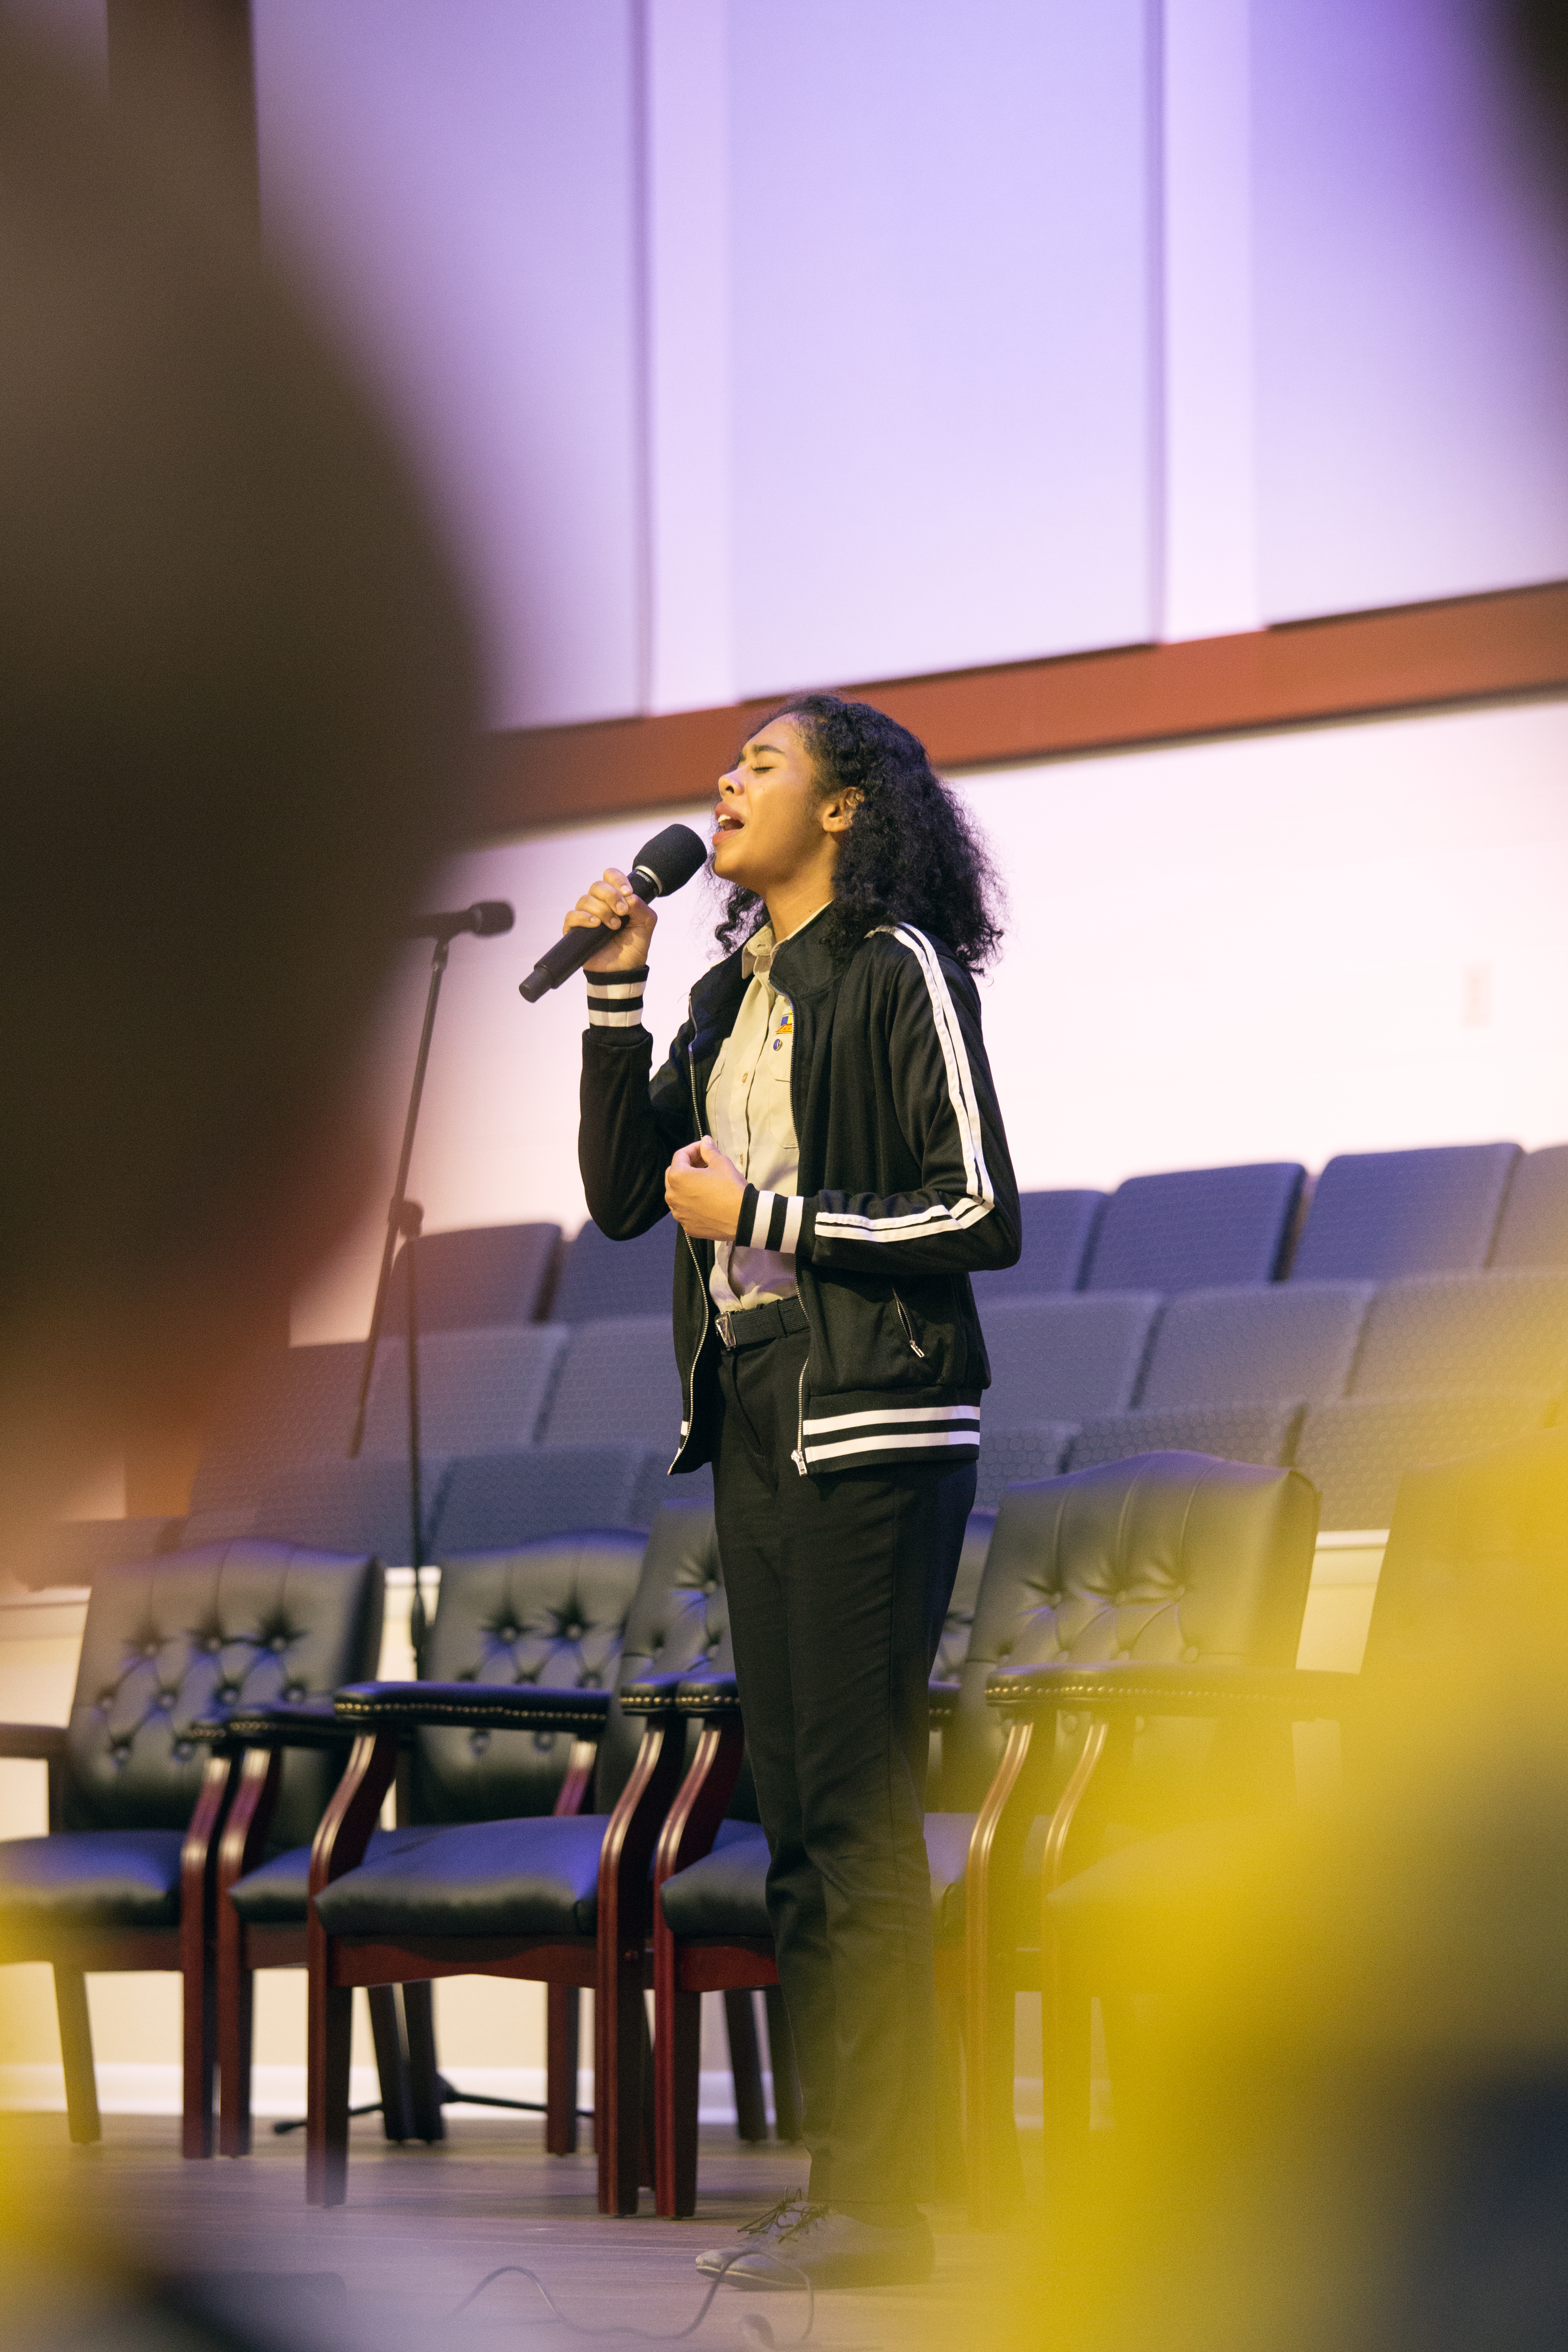 Samantha Grady, the Adventist student who was wounded during the Parkland, Florida mass shooting, sings “I Know My Redeemer Lives.”